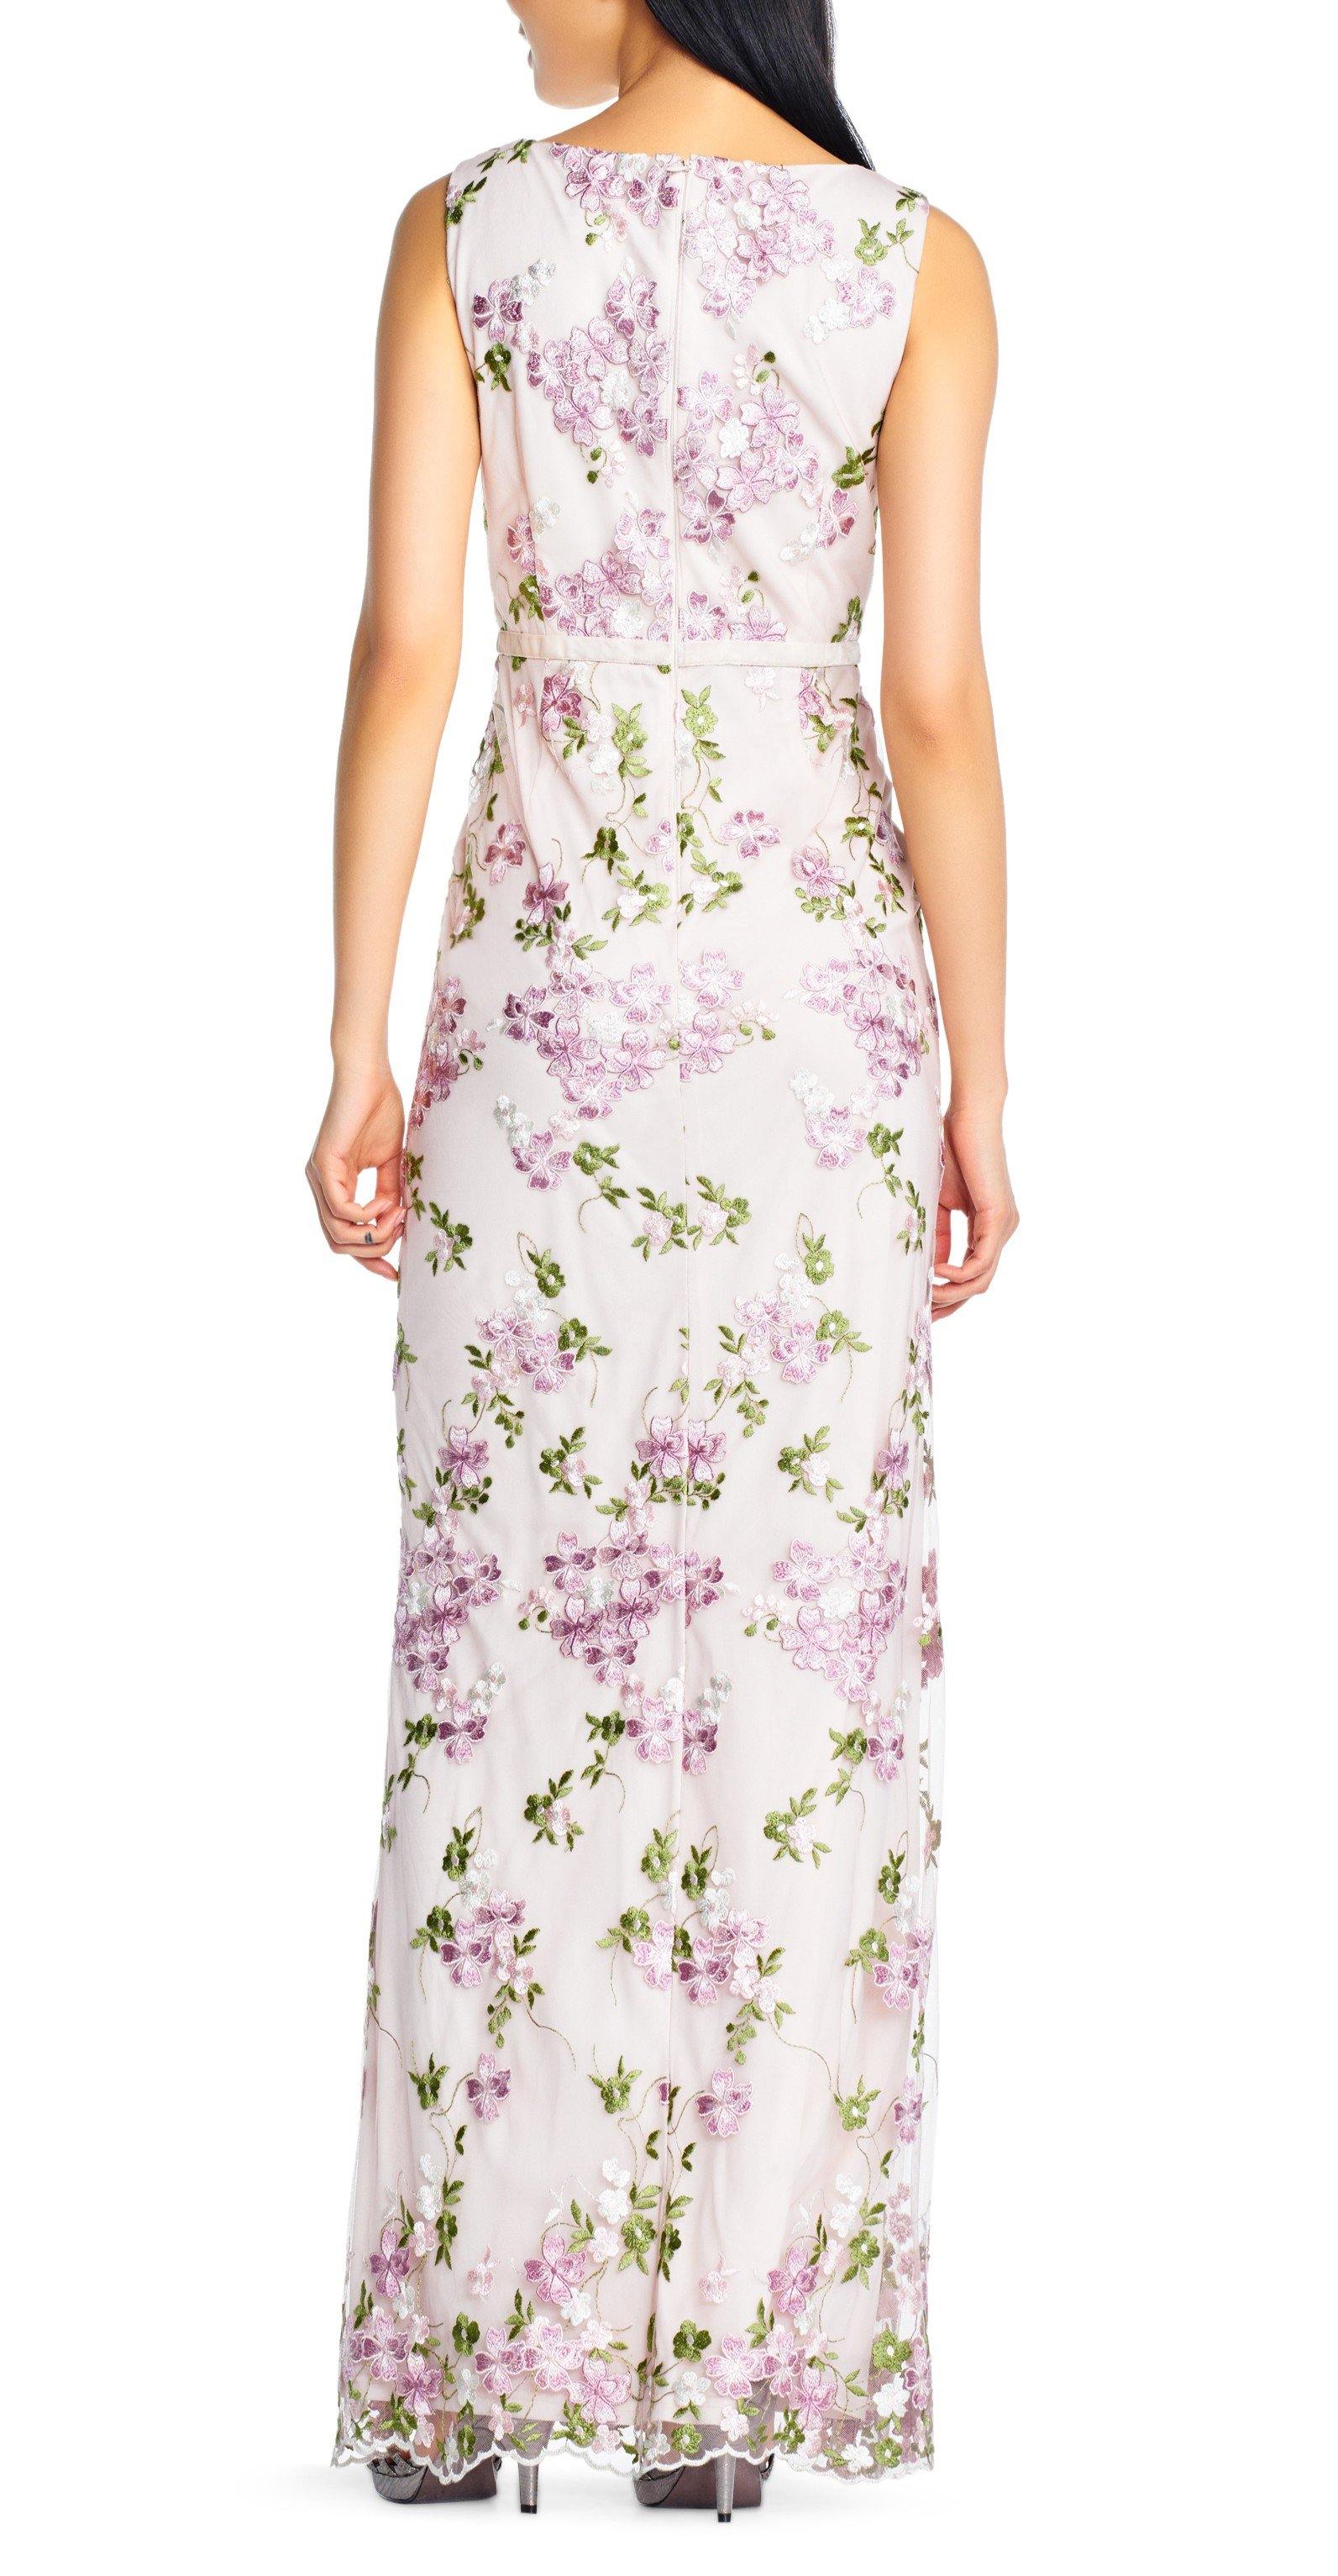 Adrianna Papell Sleeveless Long Formal Floral Dress - The Dress Outlet Adrianna Papell